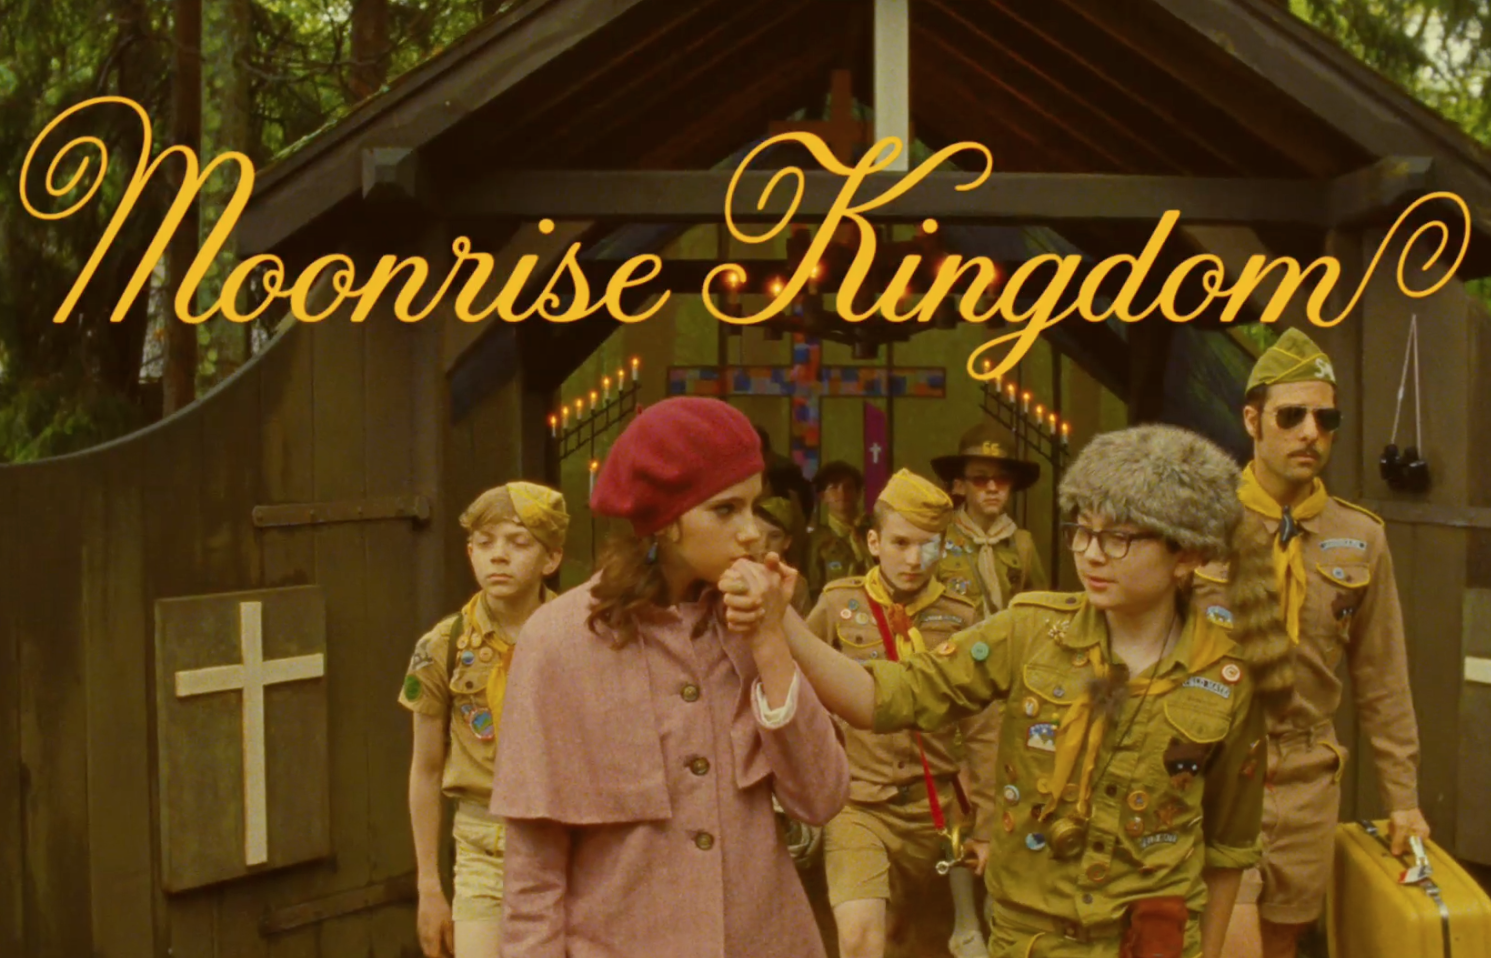 http://2.bp.blogspot.com/-kBioMtlA4Bg/UPlyN0IGxWI/AAAAAAAABCs/obmT4N6wmt0/s1600/Wes-Andersons-Moonrise-Kingdom-Official-HD-Trailer.png